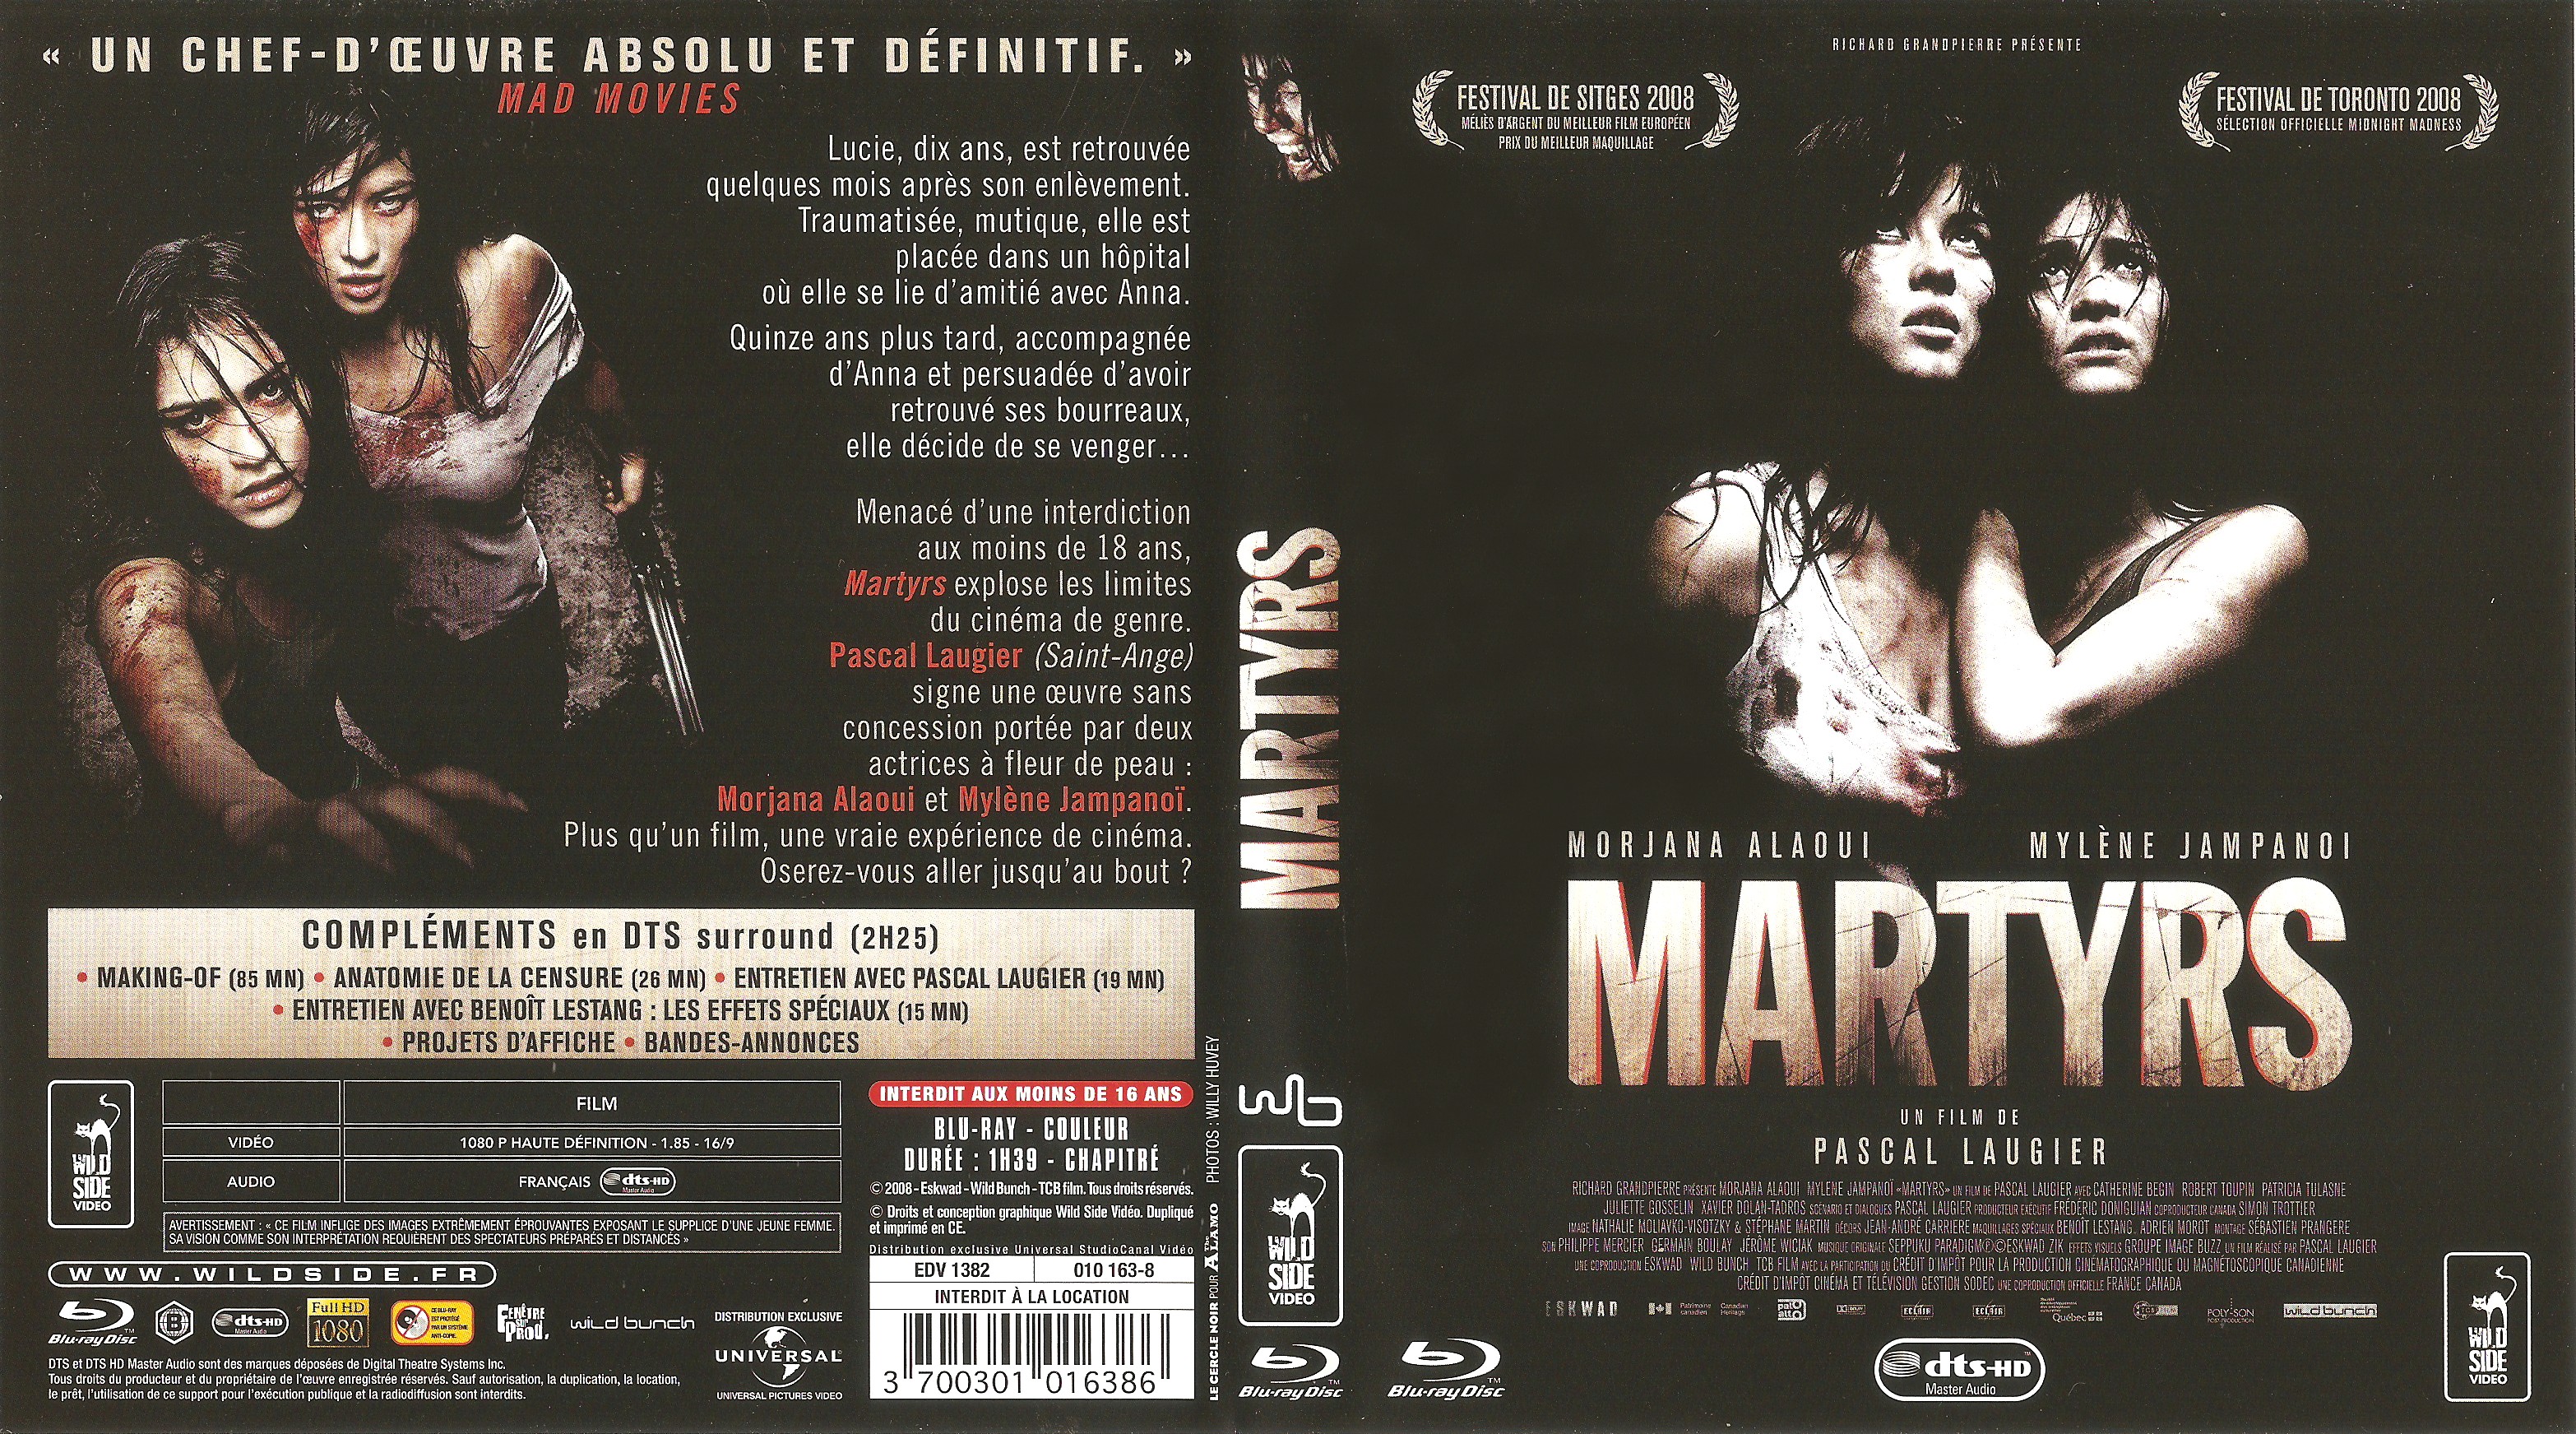 Jaquette DVD Martyrs (BLU-RAY)